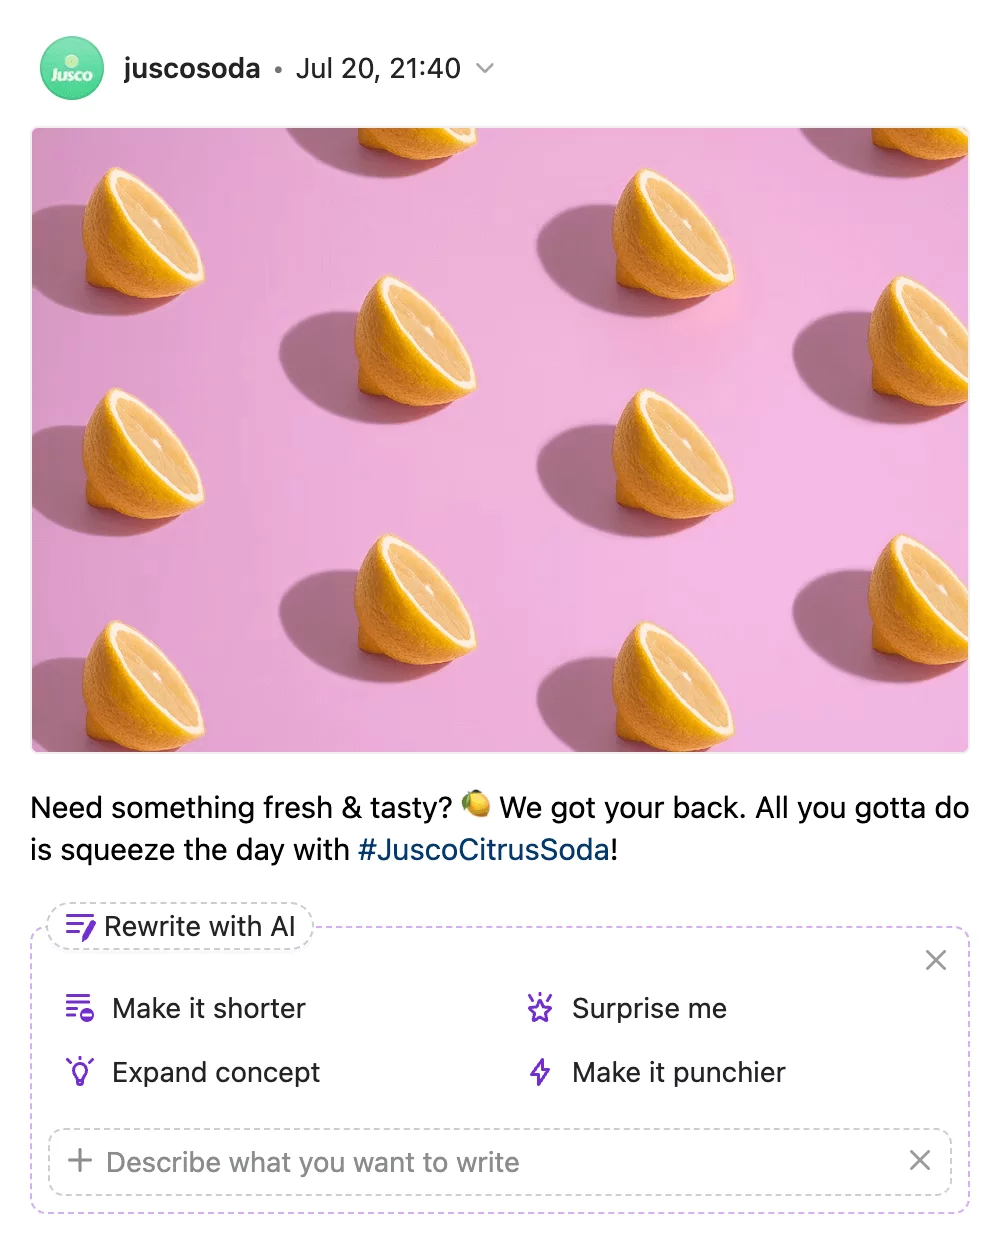 Social media post in Planable featuring halved lemons on a pink background, promoting #JuscoCitrusSoda with AI rewrite options for the caption.